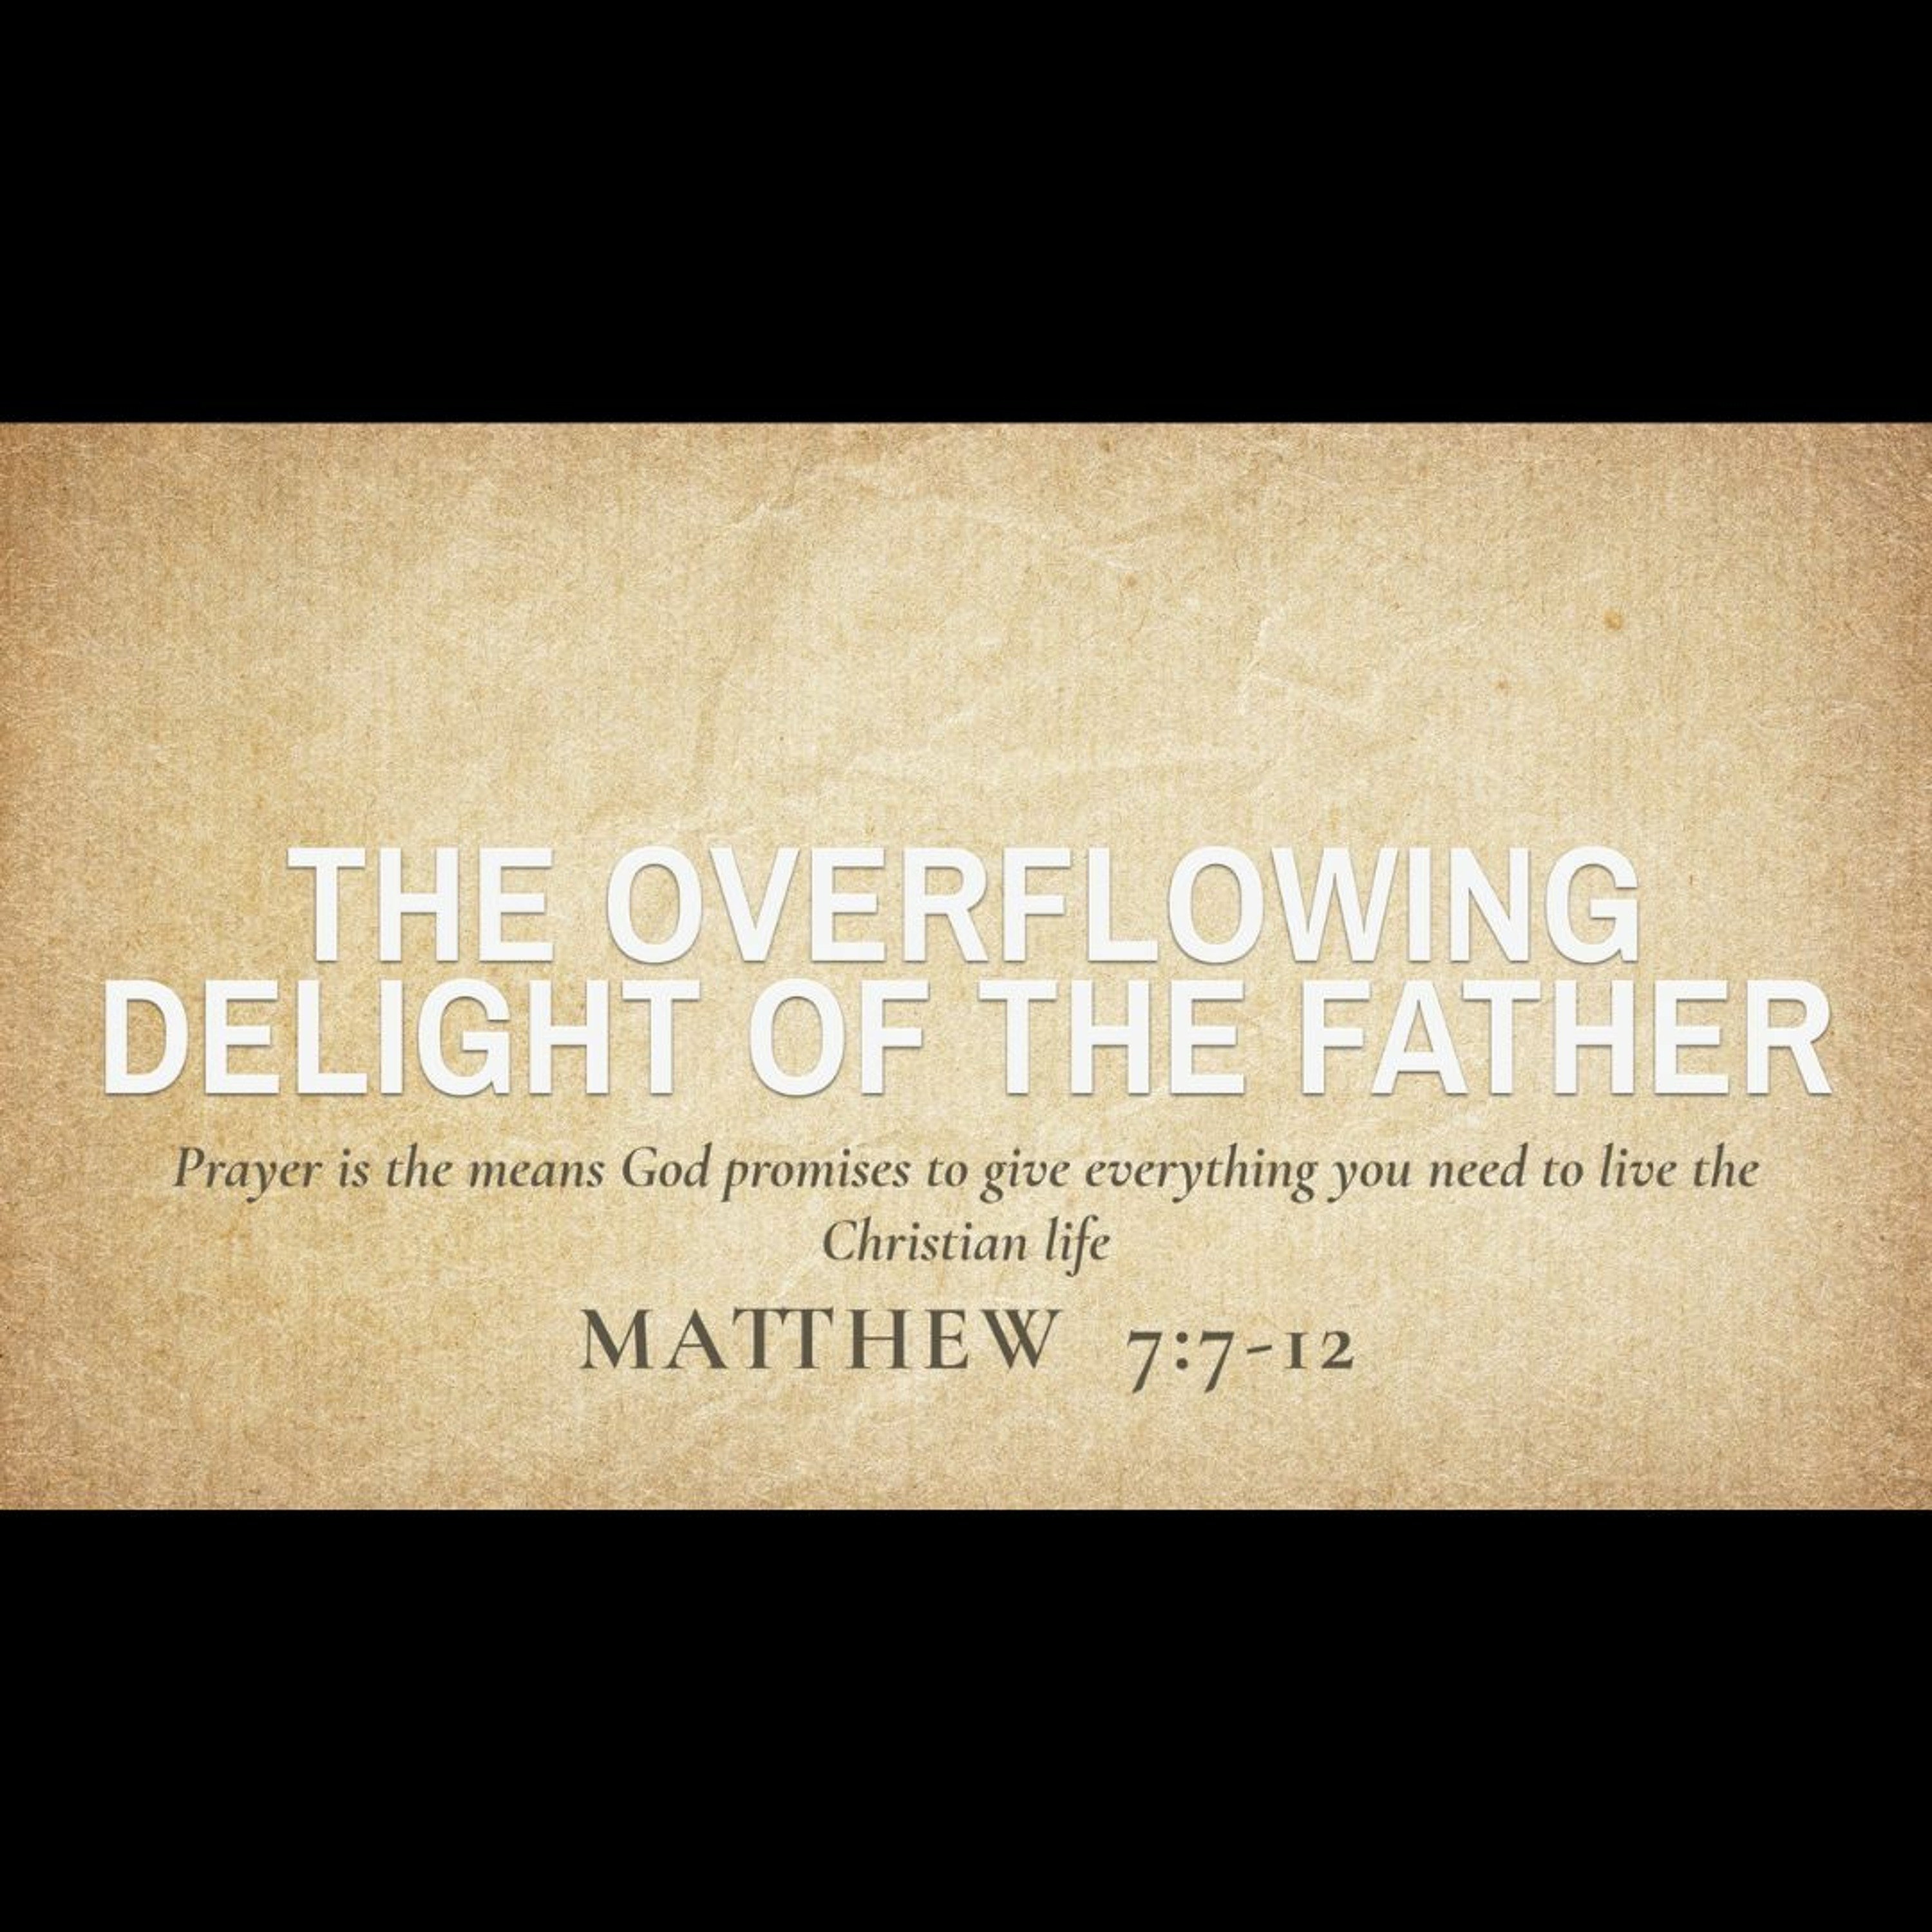 The Overflowing Delight of the Father (Matthew 7:7-12)